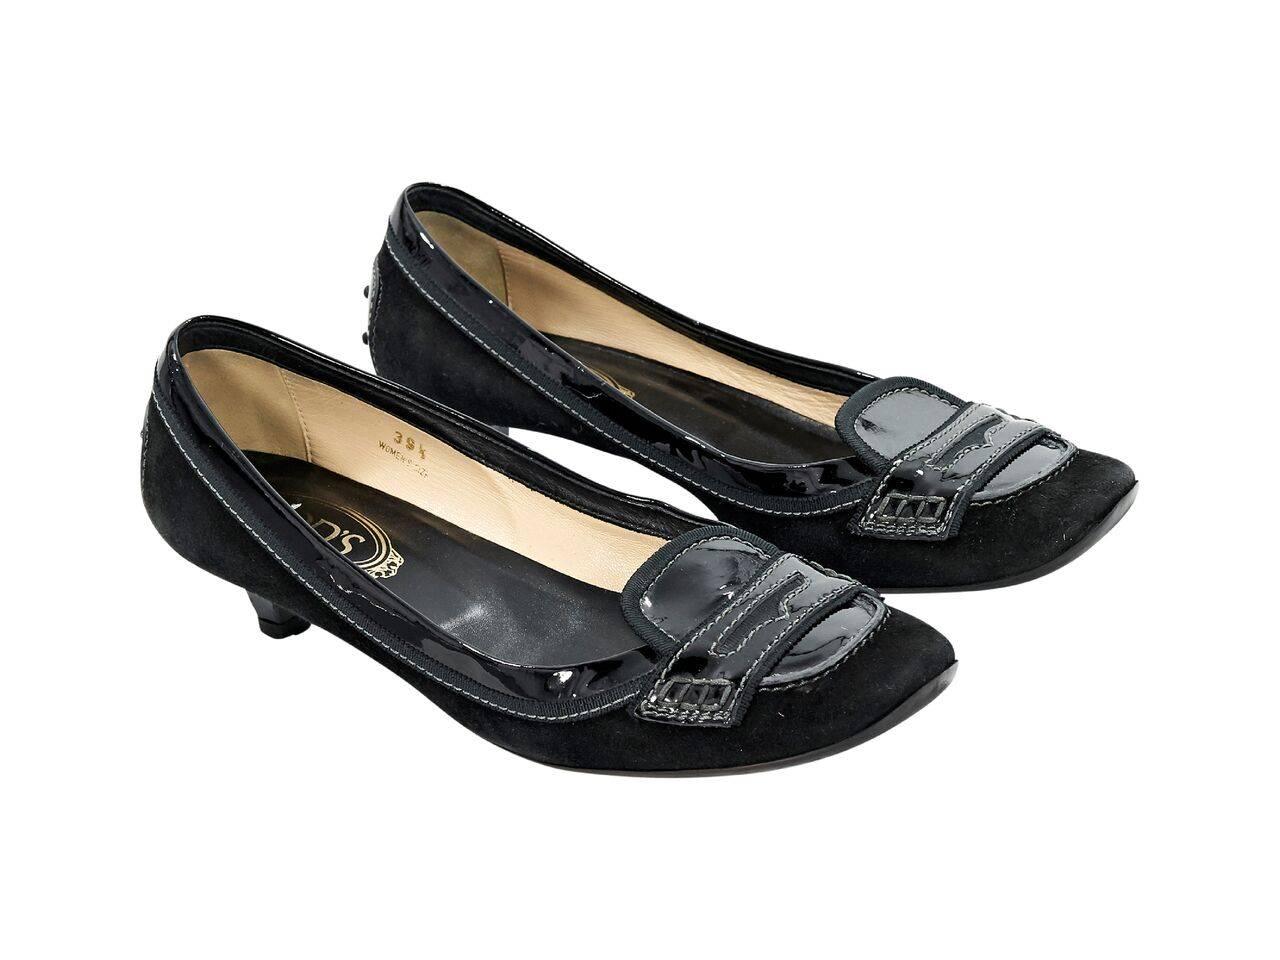 Product details:  Black suede loafer kitten heels by Tod's.  Trimmed with patent leather.  Round toe.  Slip-on style. 
Condition: Pre-owned. Very good.
Est. Retail $ 398.00